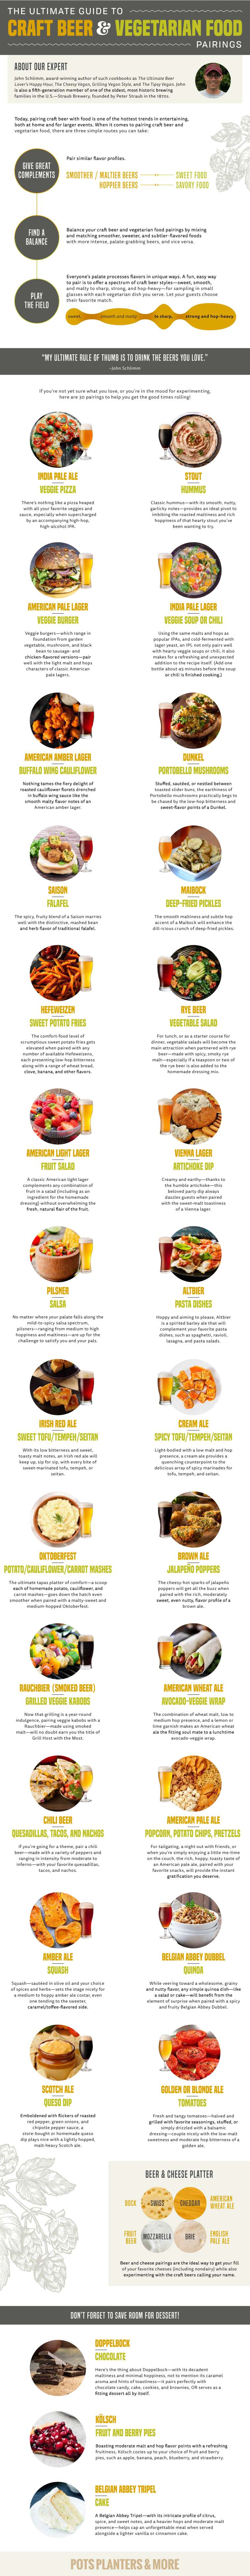 Perfectly Pair Craft Beer With Vegetarian Cuisine Using This Handy Guide